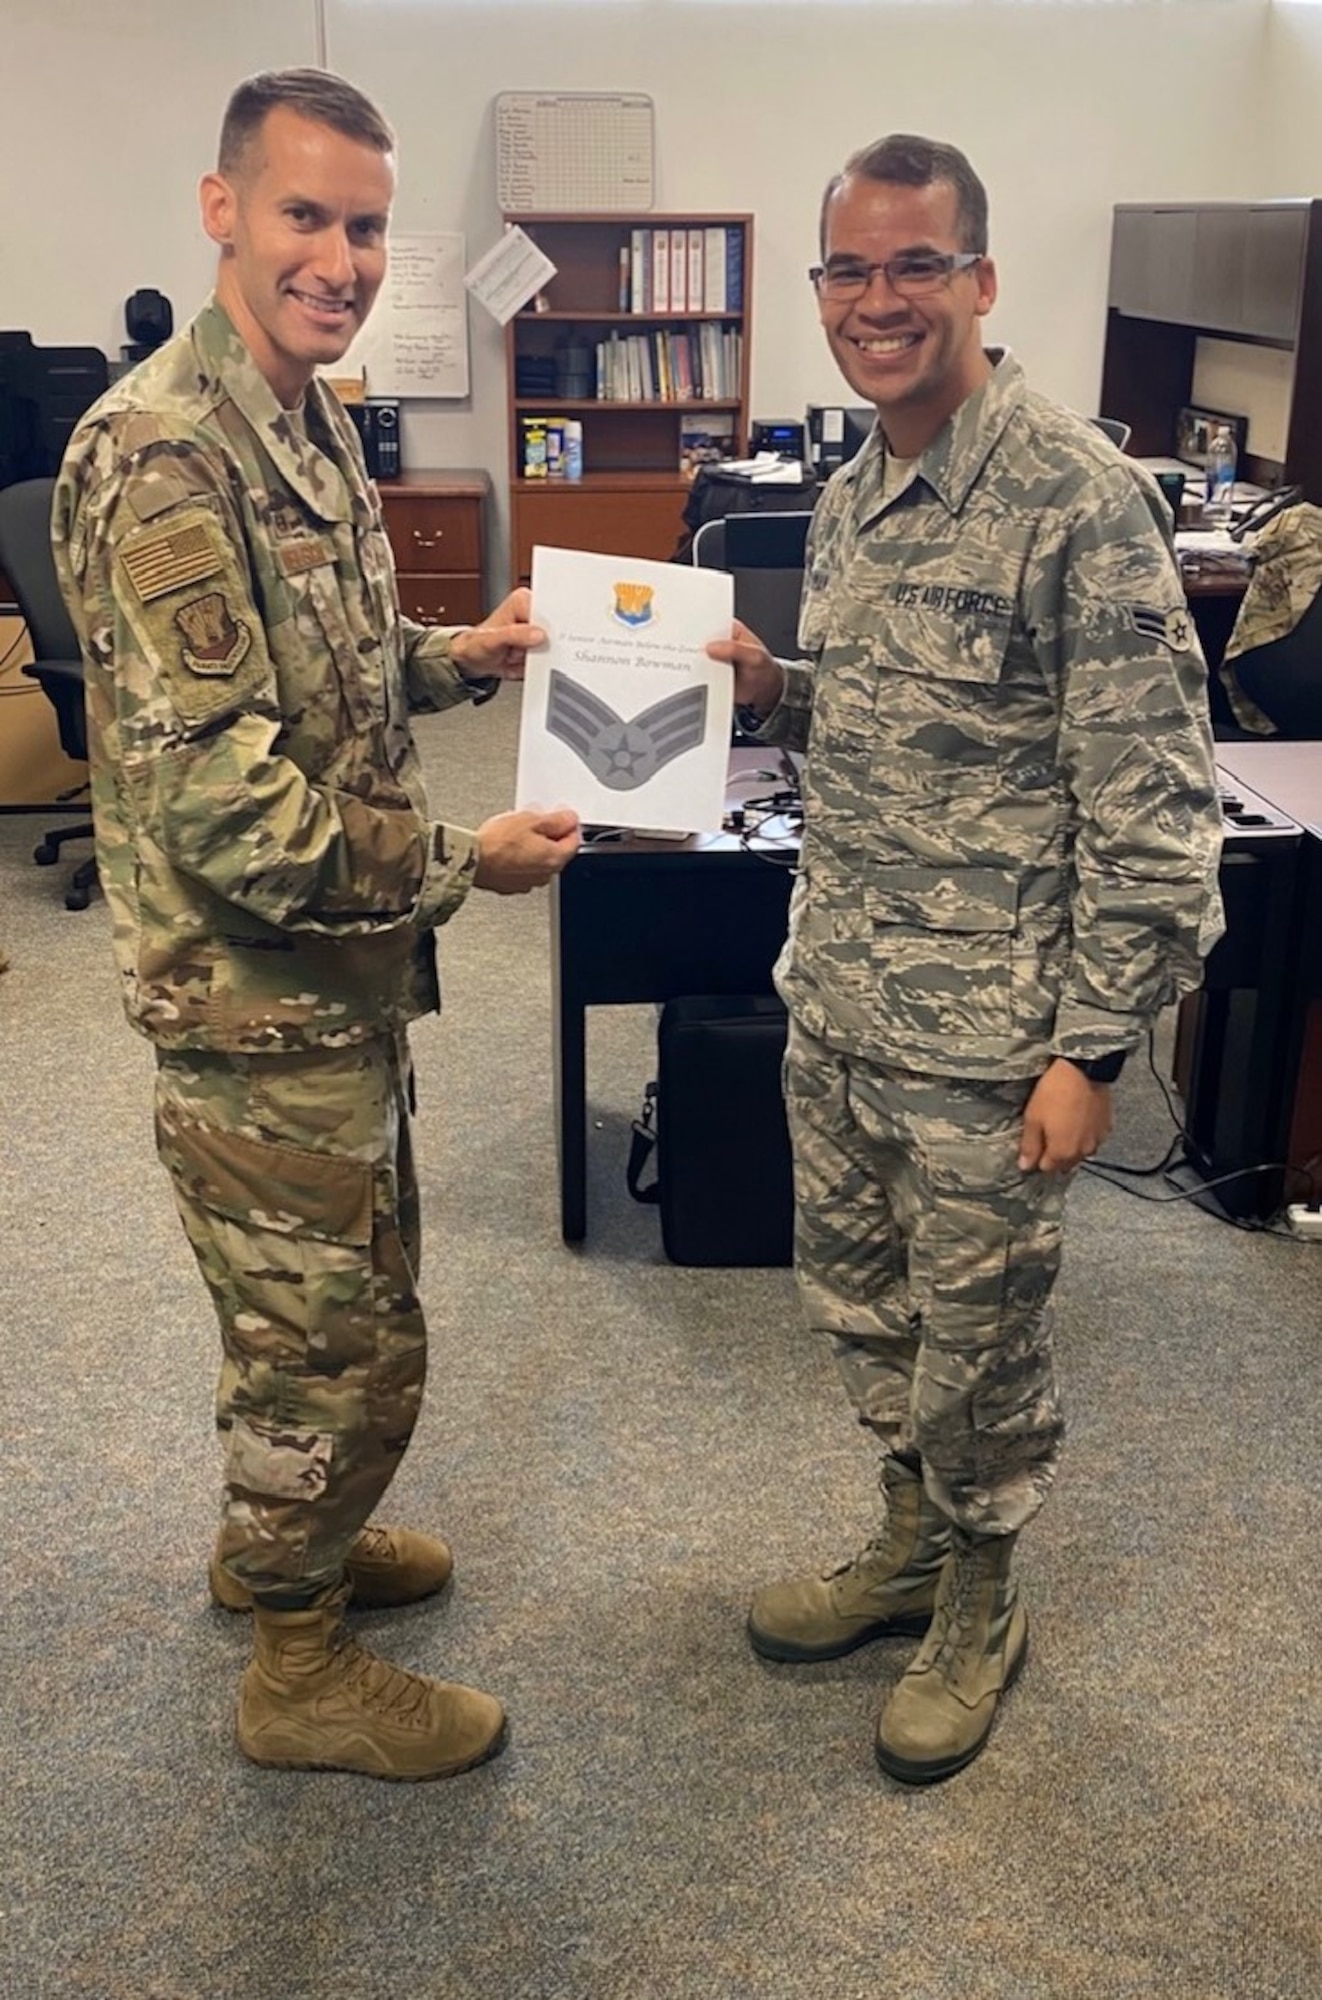 U.S. Air Force Col. Steve Snelson (left) the 6th Air Refueling Wing commander, presents a certificate to Airman 1st Class Shannon Bowman (right) a 6th ARW photojournalist, March 17, 2020, at MacDill Air Force Base, Fla.